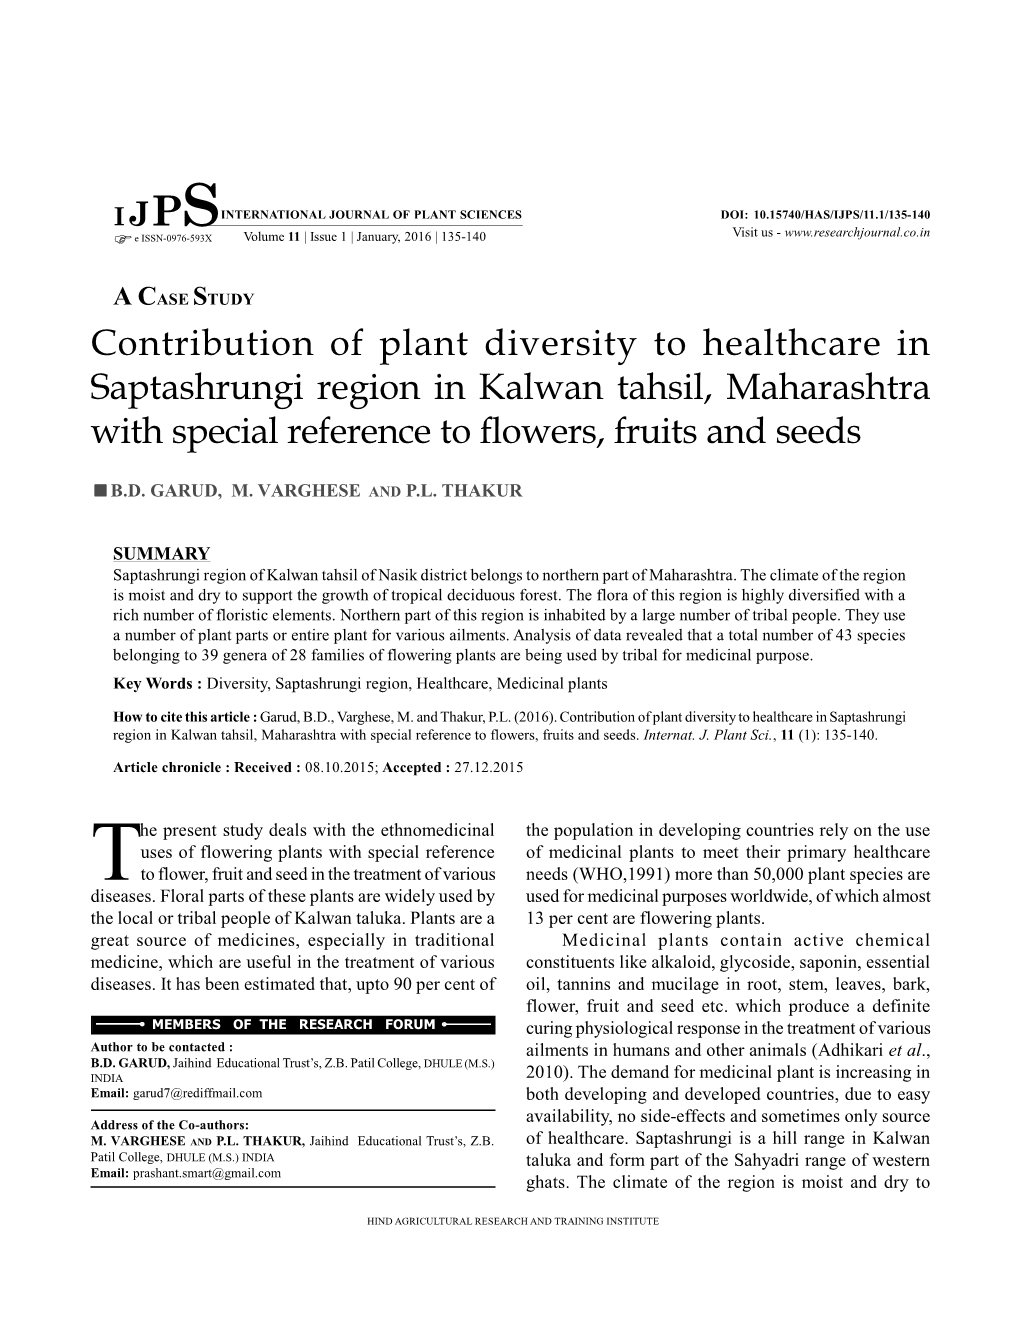 Contribution of Plant Diversity to Healthcare in Saptashrungi Region in Kalwan Tahsil, Maharashtra with Special Reference to Flowers, Fruits and Seeds